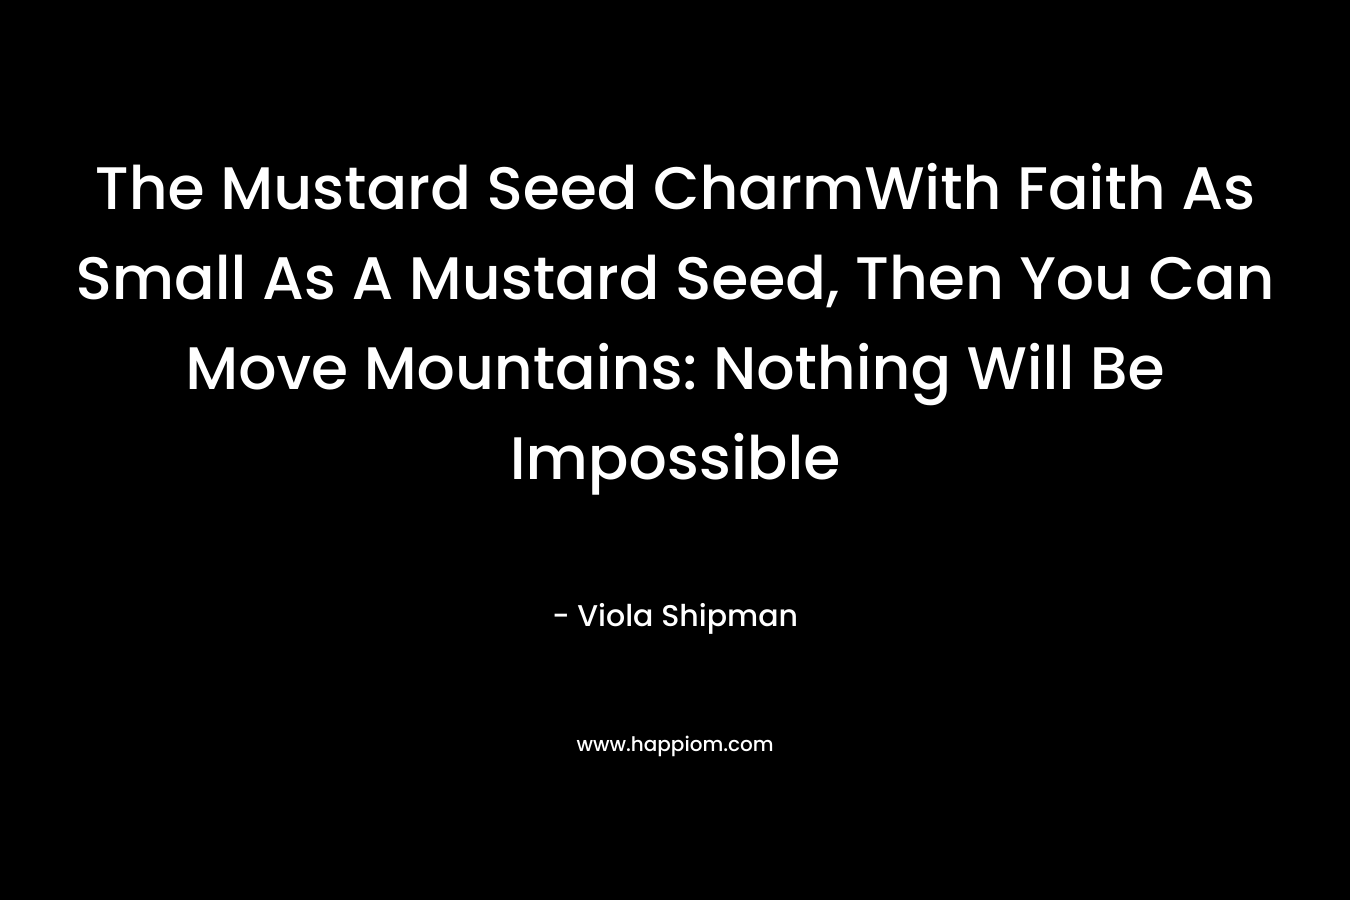 The Mustard Seed CharmWith Faith As Small As A Mustard Seed, Then You Can Move Mountains: Nothing Will Be Impossible – Viola Shipman